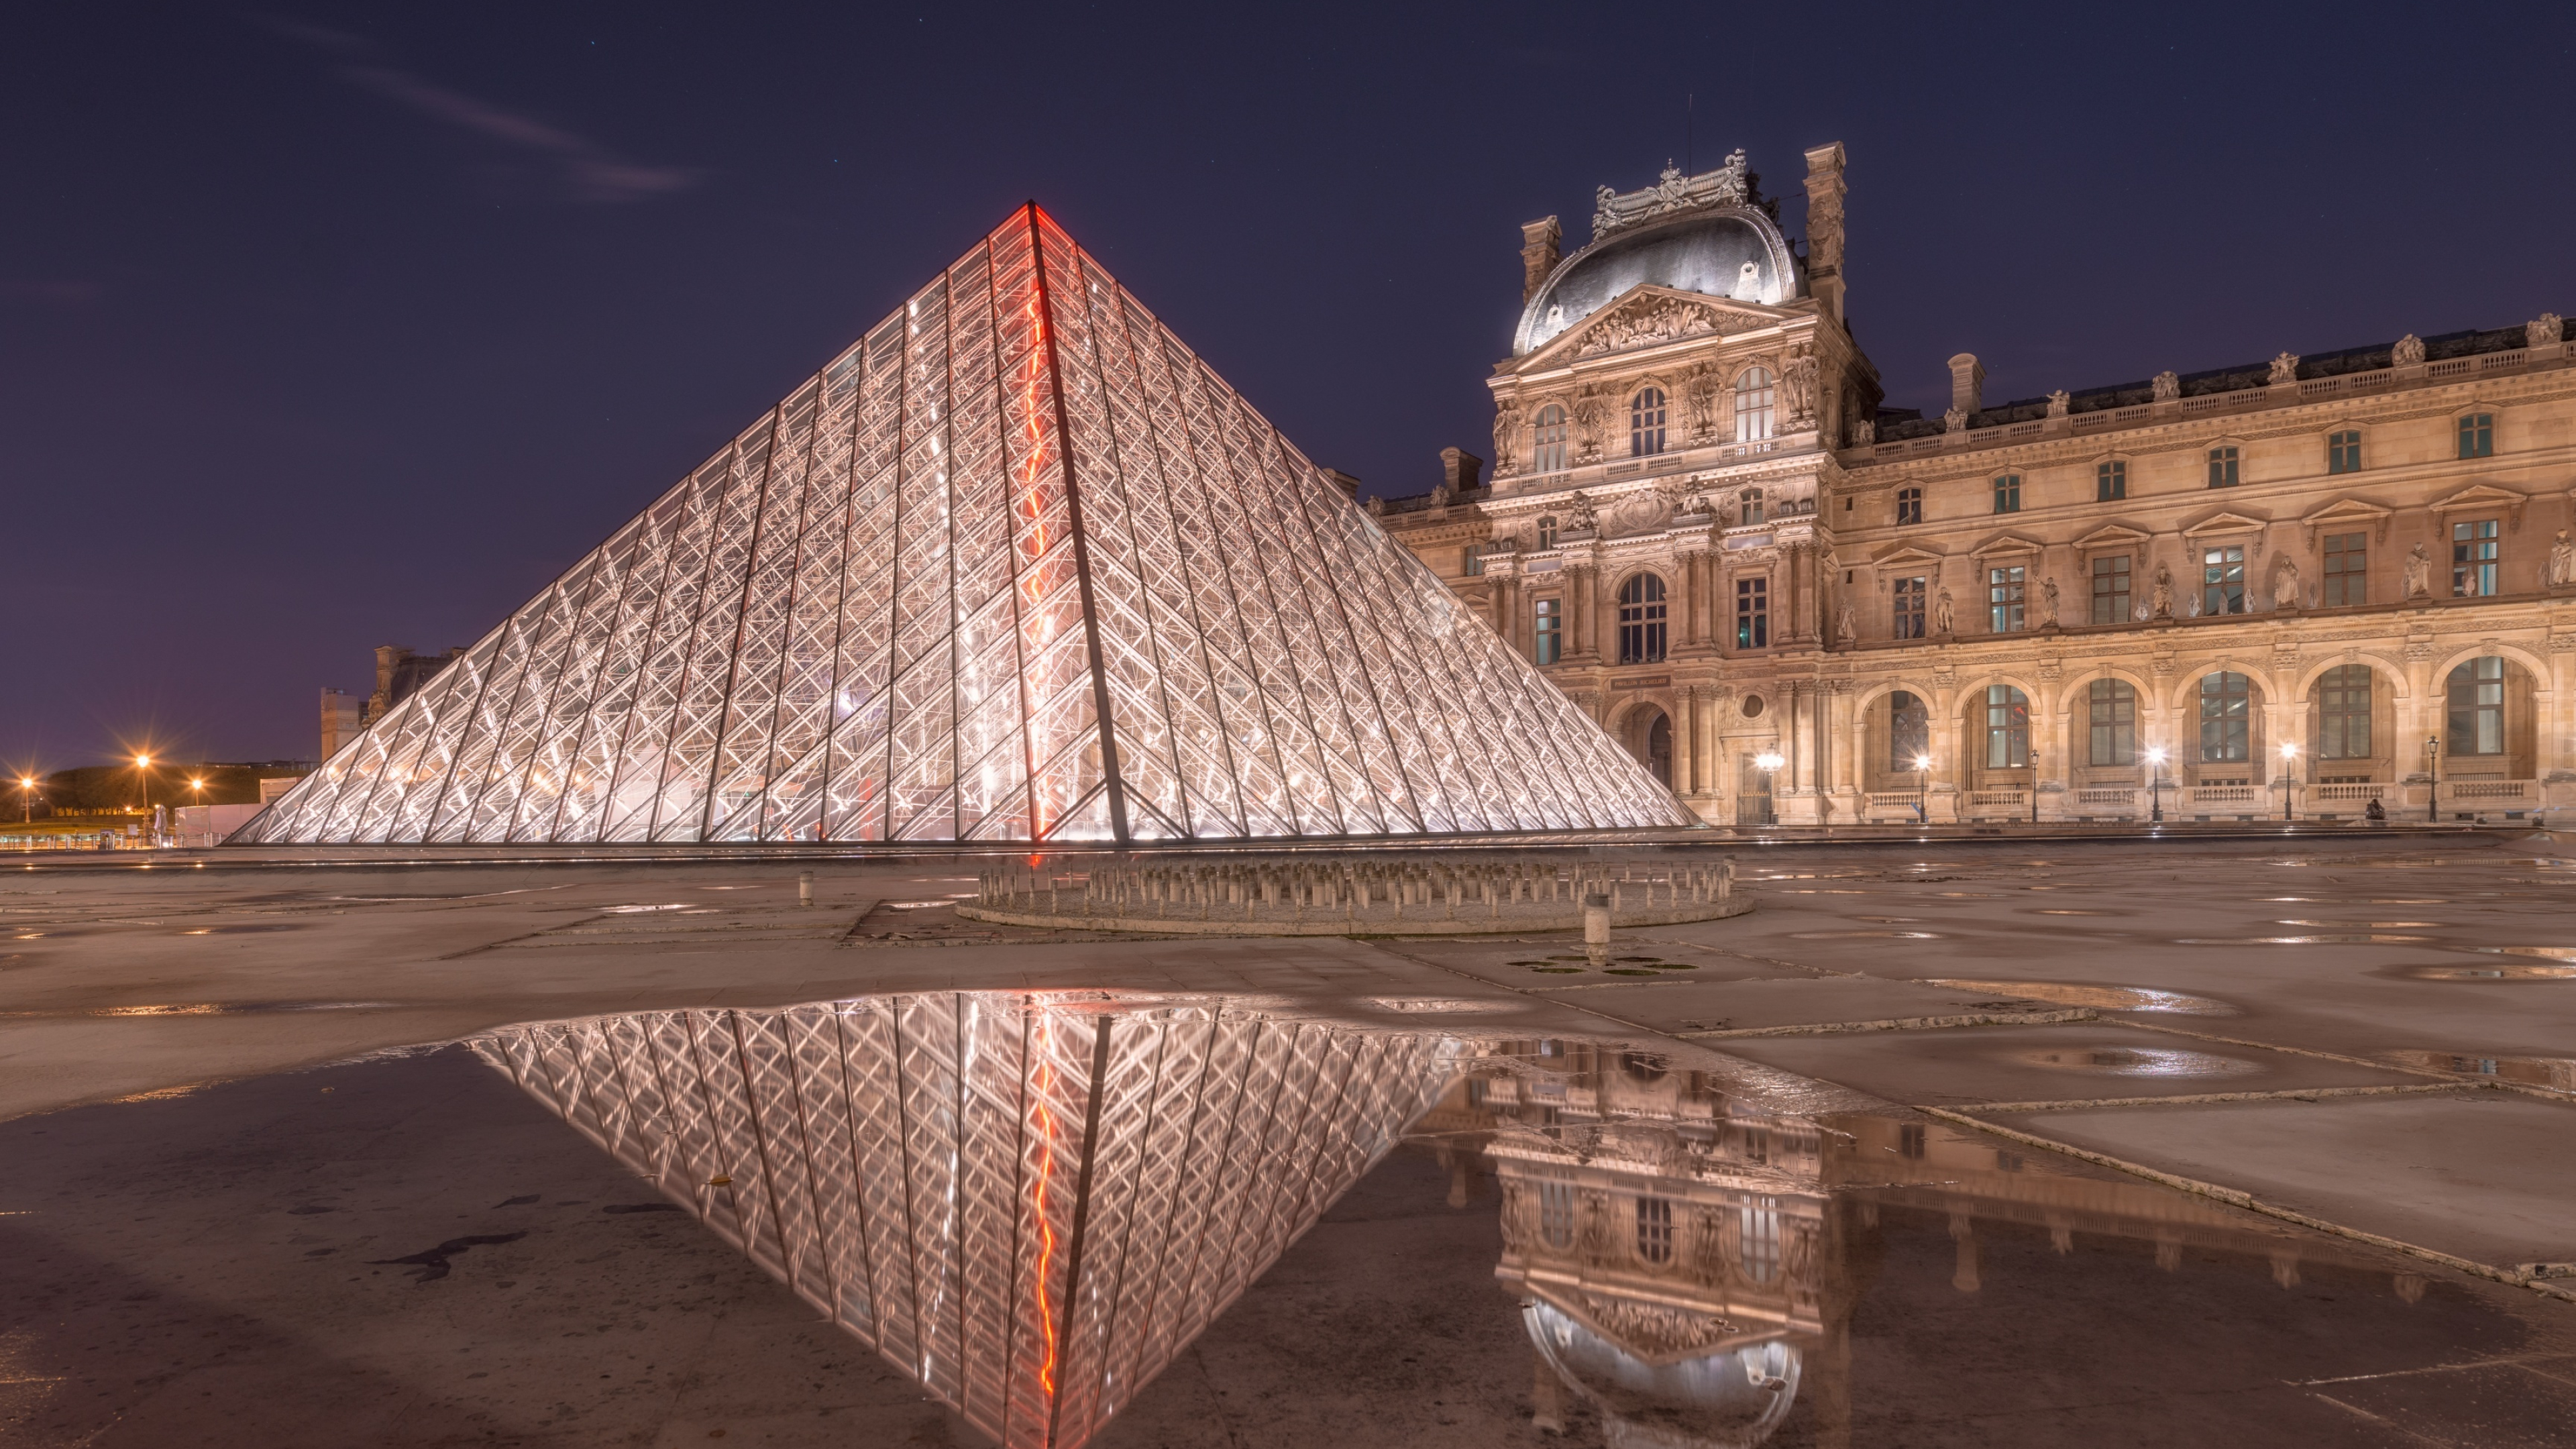 Immersive visual experience, Widescreen delight, Breathtaking Louvre view, High-resolution image, 3840x2160 4K Desktop